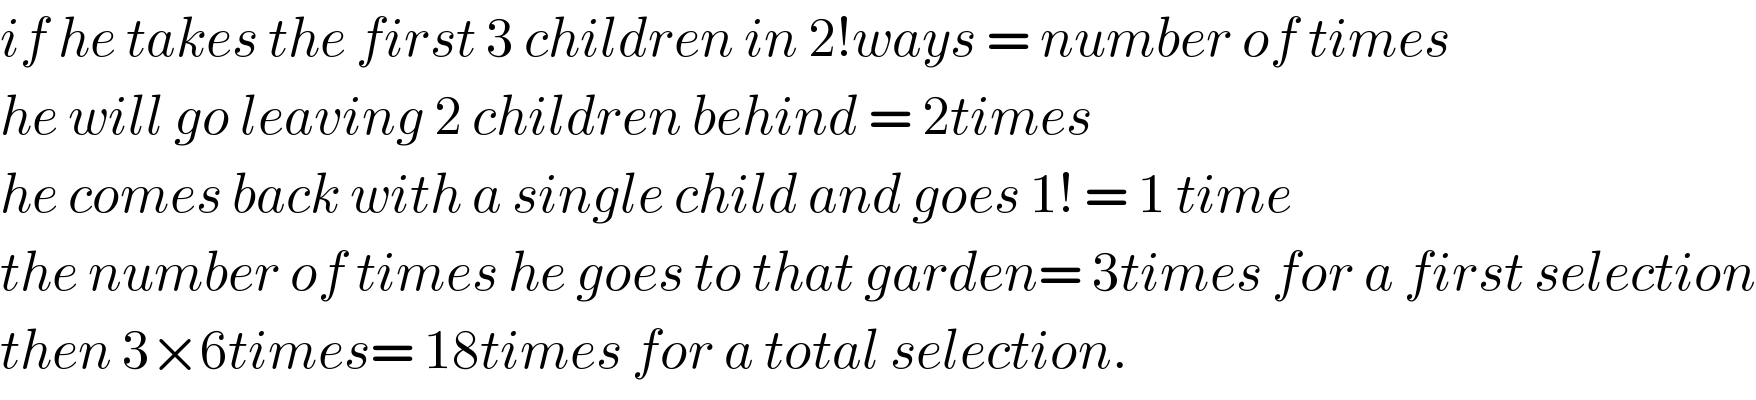 if he takes the first 3 children in 2!ways = number of times  he will go leaving 2 children behind = 2times  he comes back with a single child and goes 1! = 1 time  the number of times he goes to that garden= 3times for a first selection  then 3×6times= 18times for a total selection.  